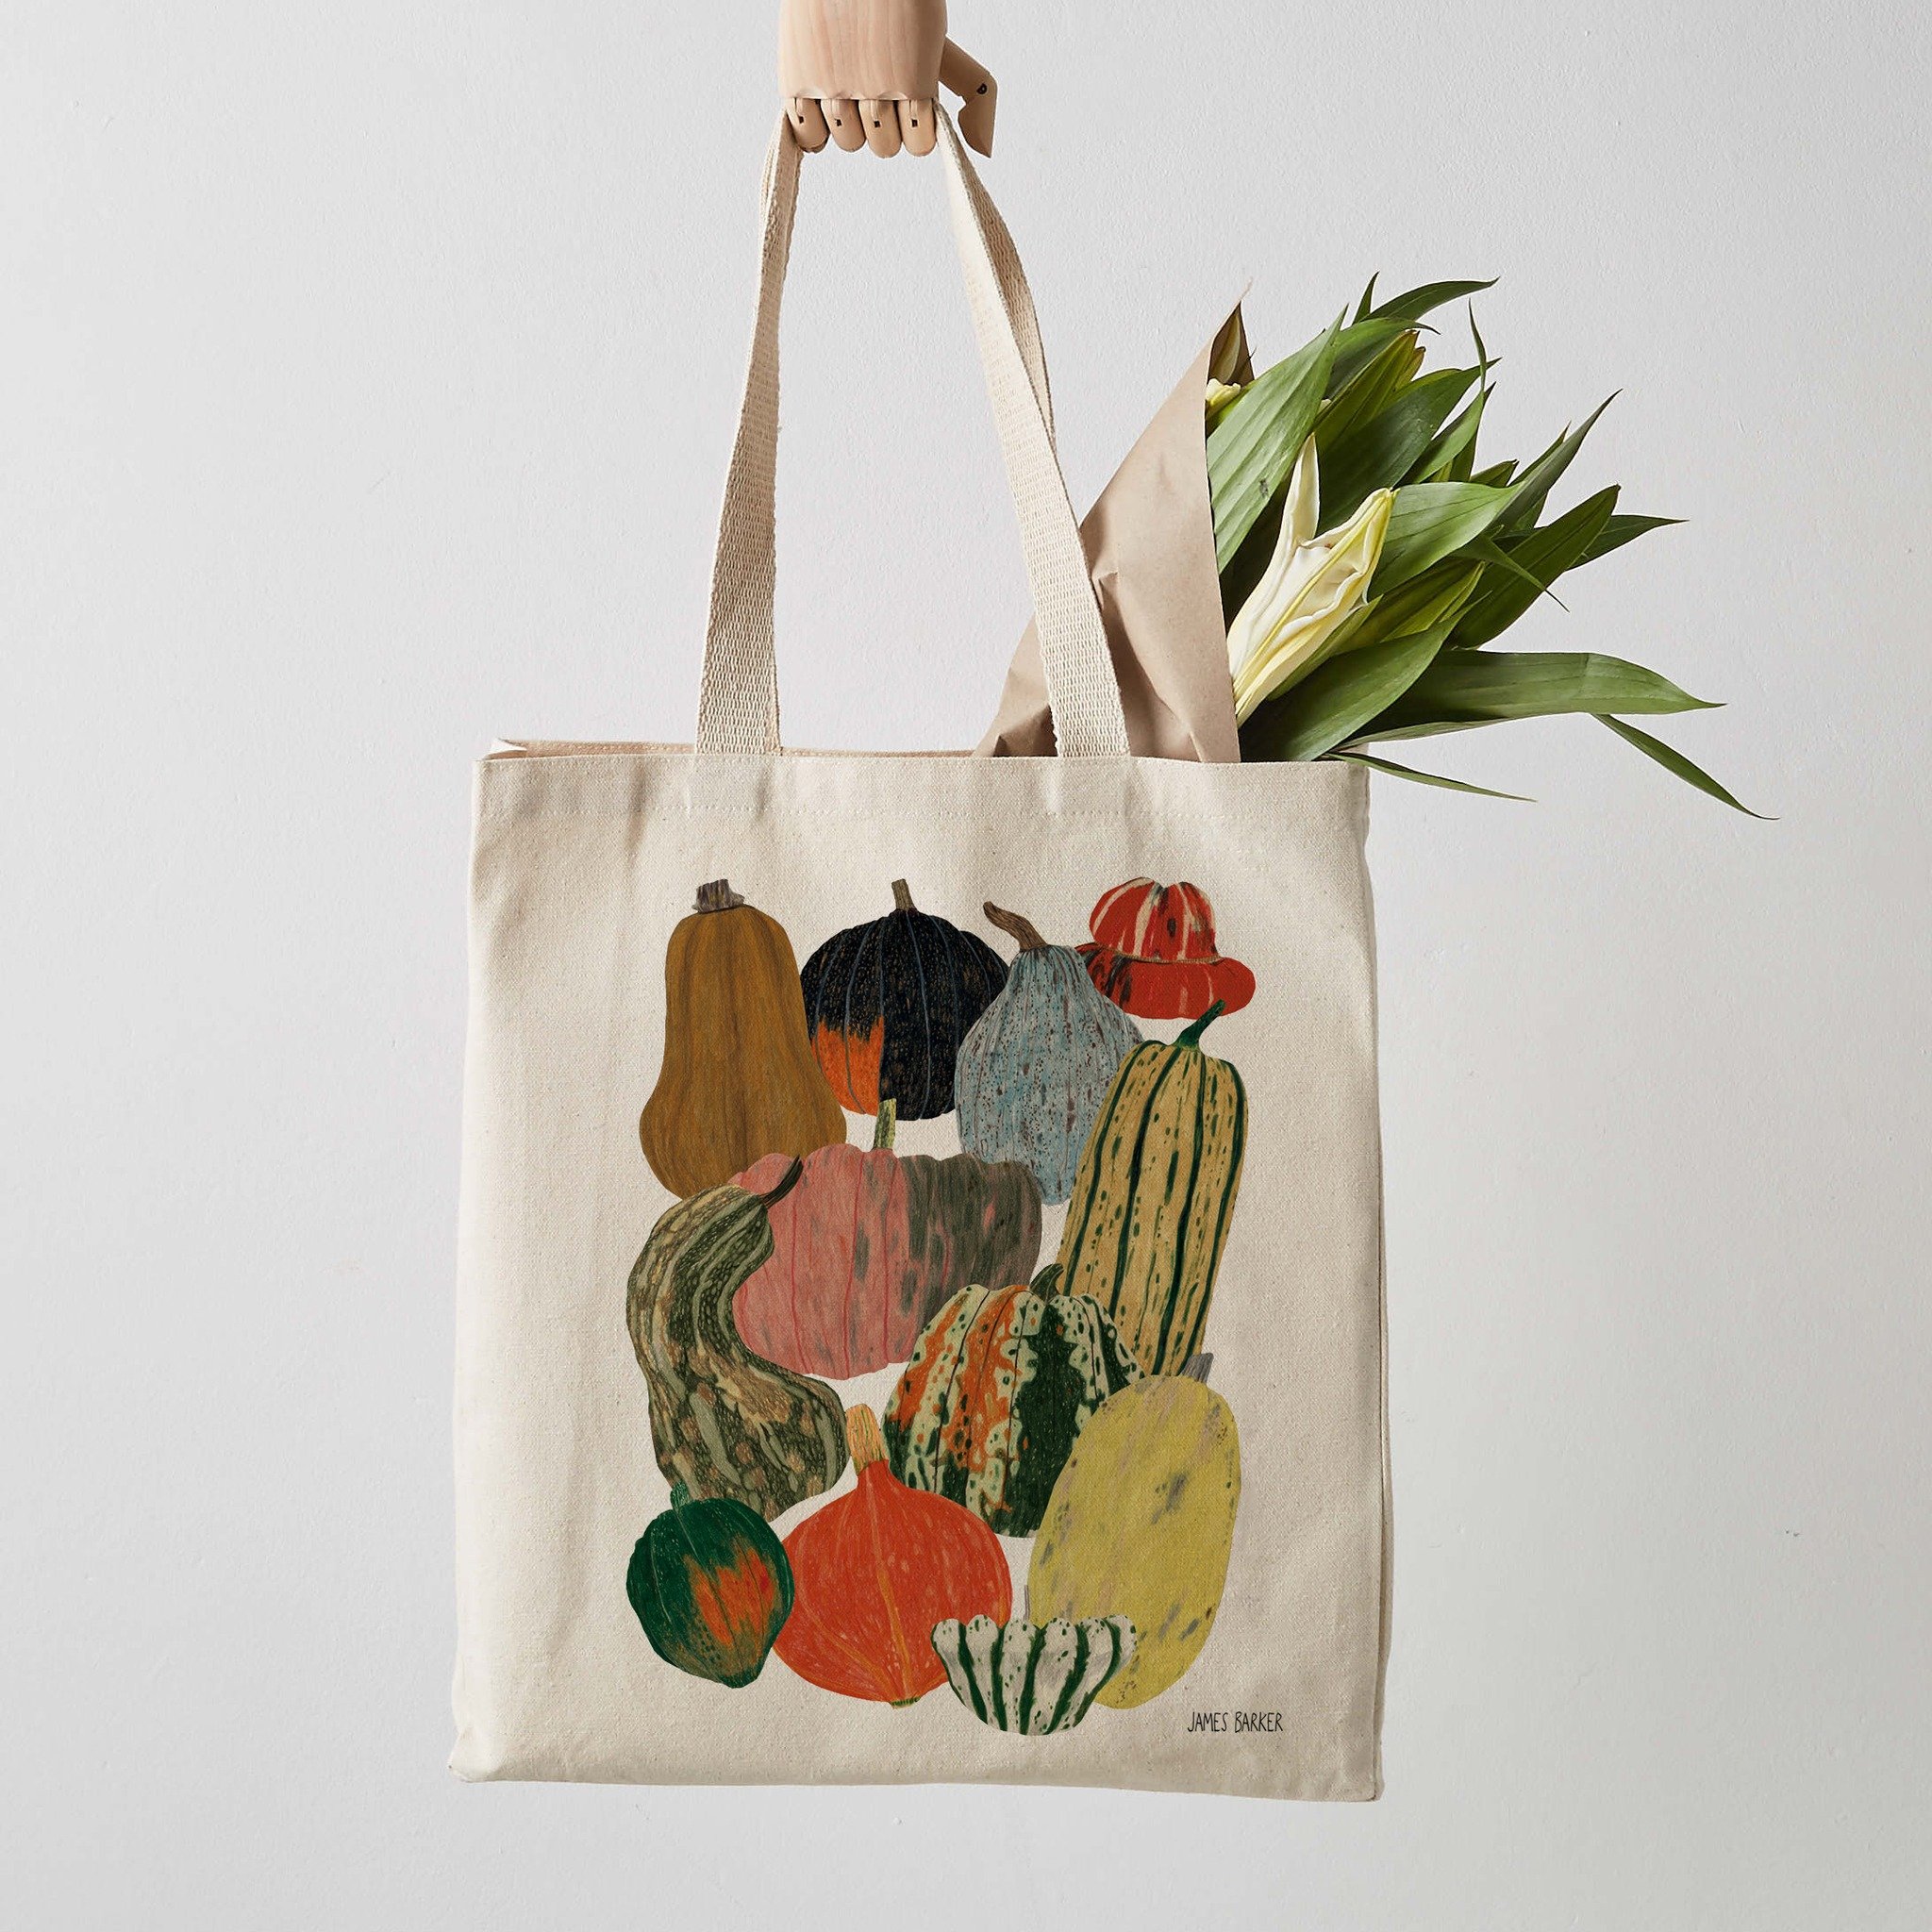 Some new and rather fine tote bags featuring ponies, crabs, and squash. Perfect for carrying squash, crabs, and I'm almost sure ponies.
-
-
-
-

#Totes #totebagstyle #squashlife #ShopSmall #totebag